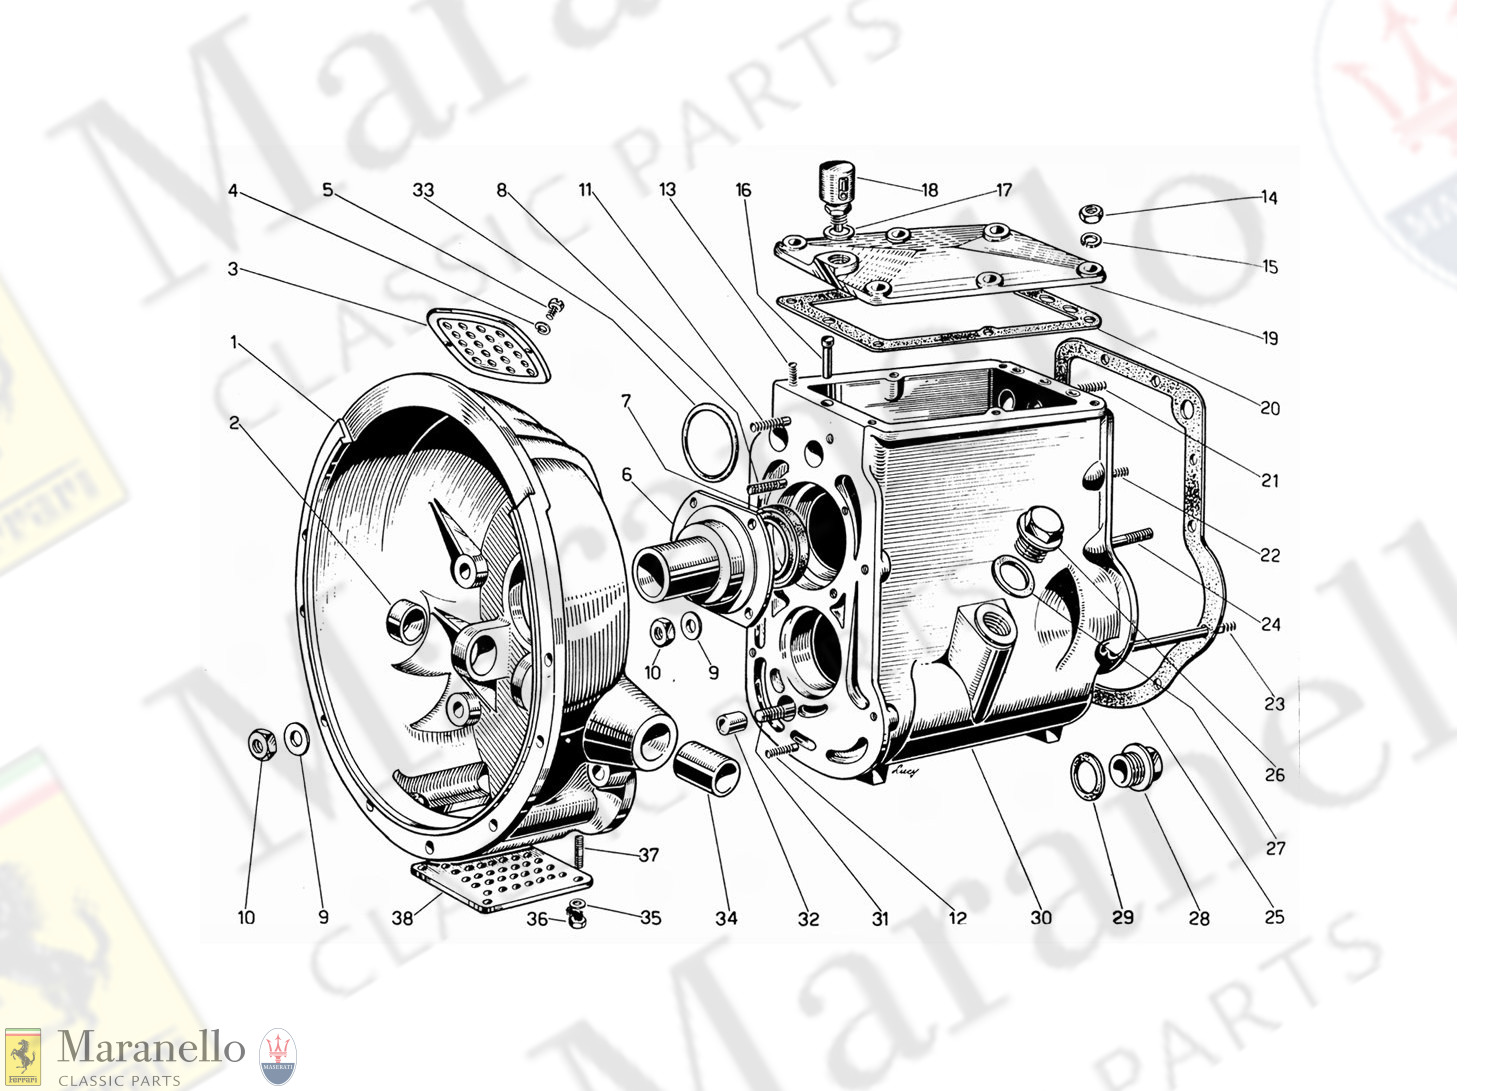 017 - Clutch Housing And Gear Box